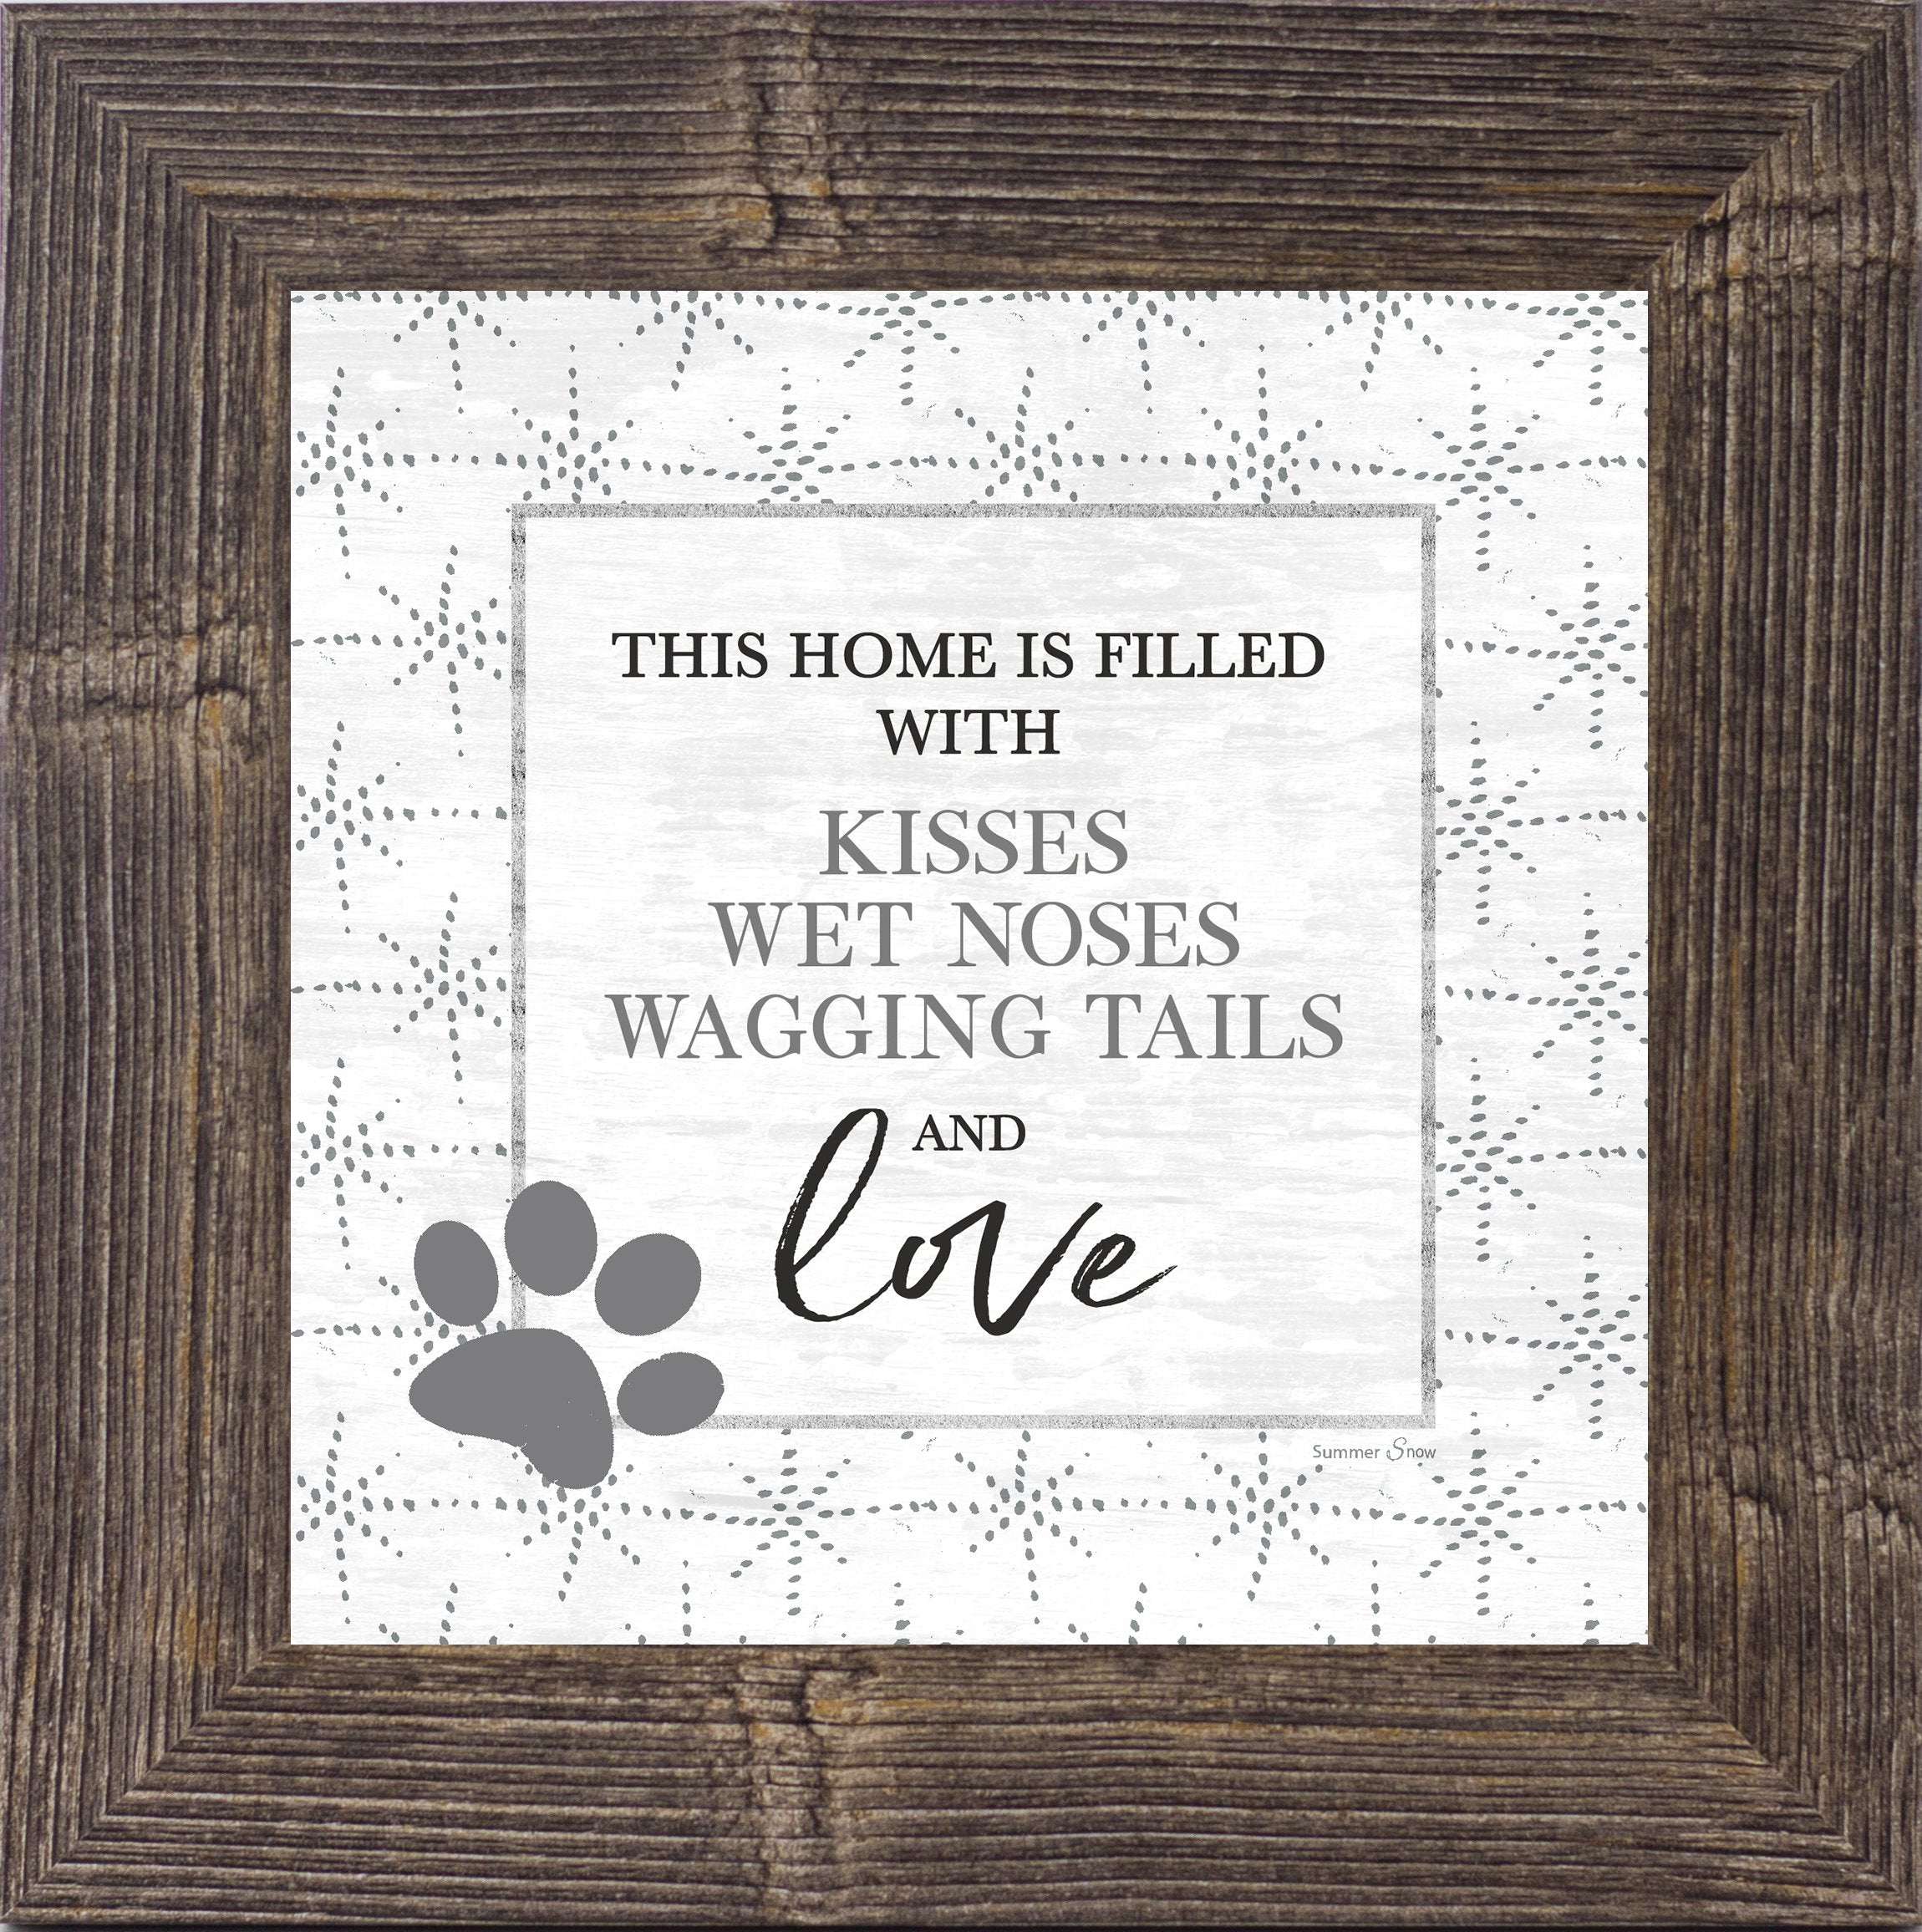 This Home is Filled With Kisses by Summer Snow SS865 - Summer Snow Art